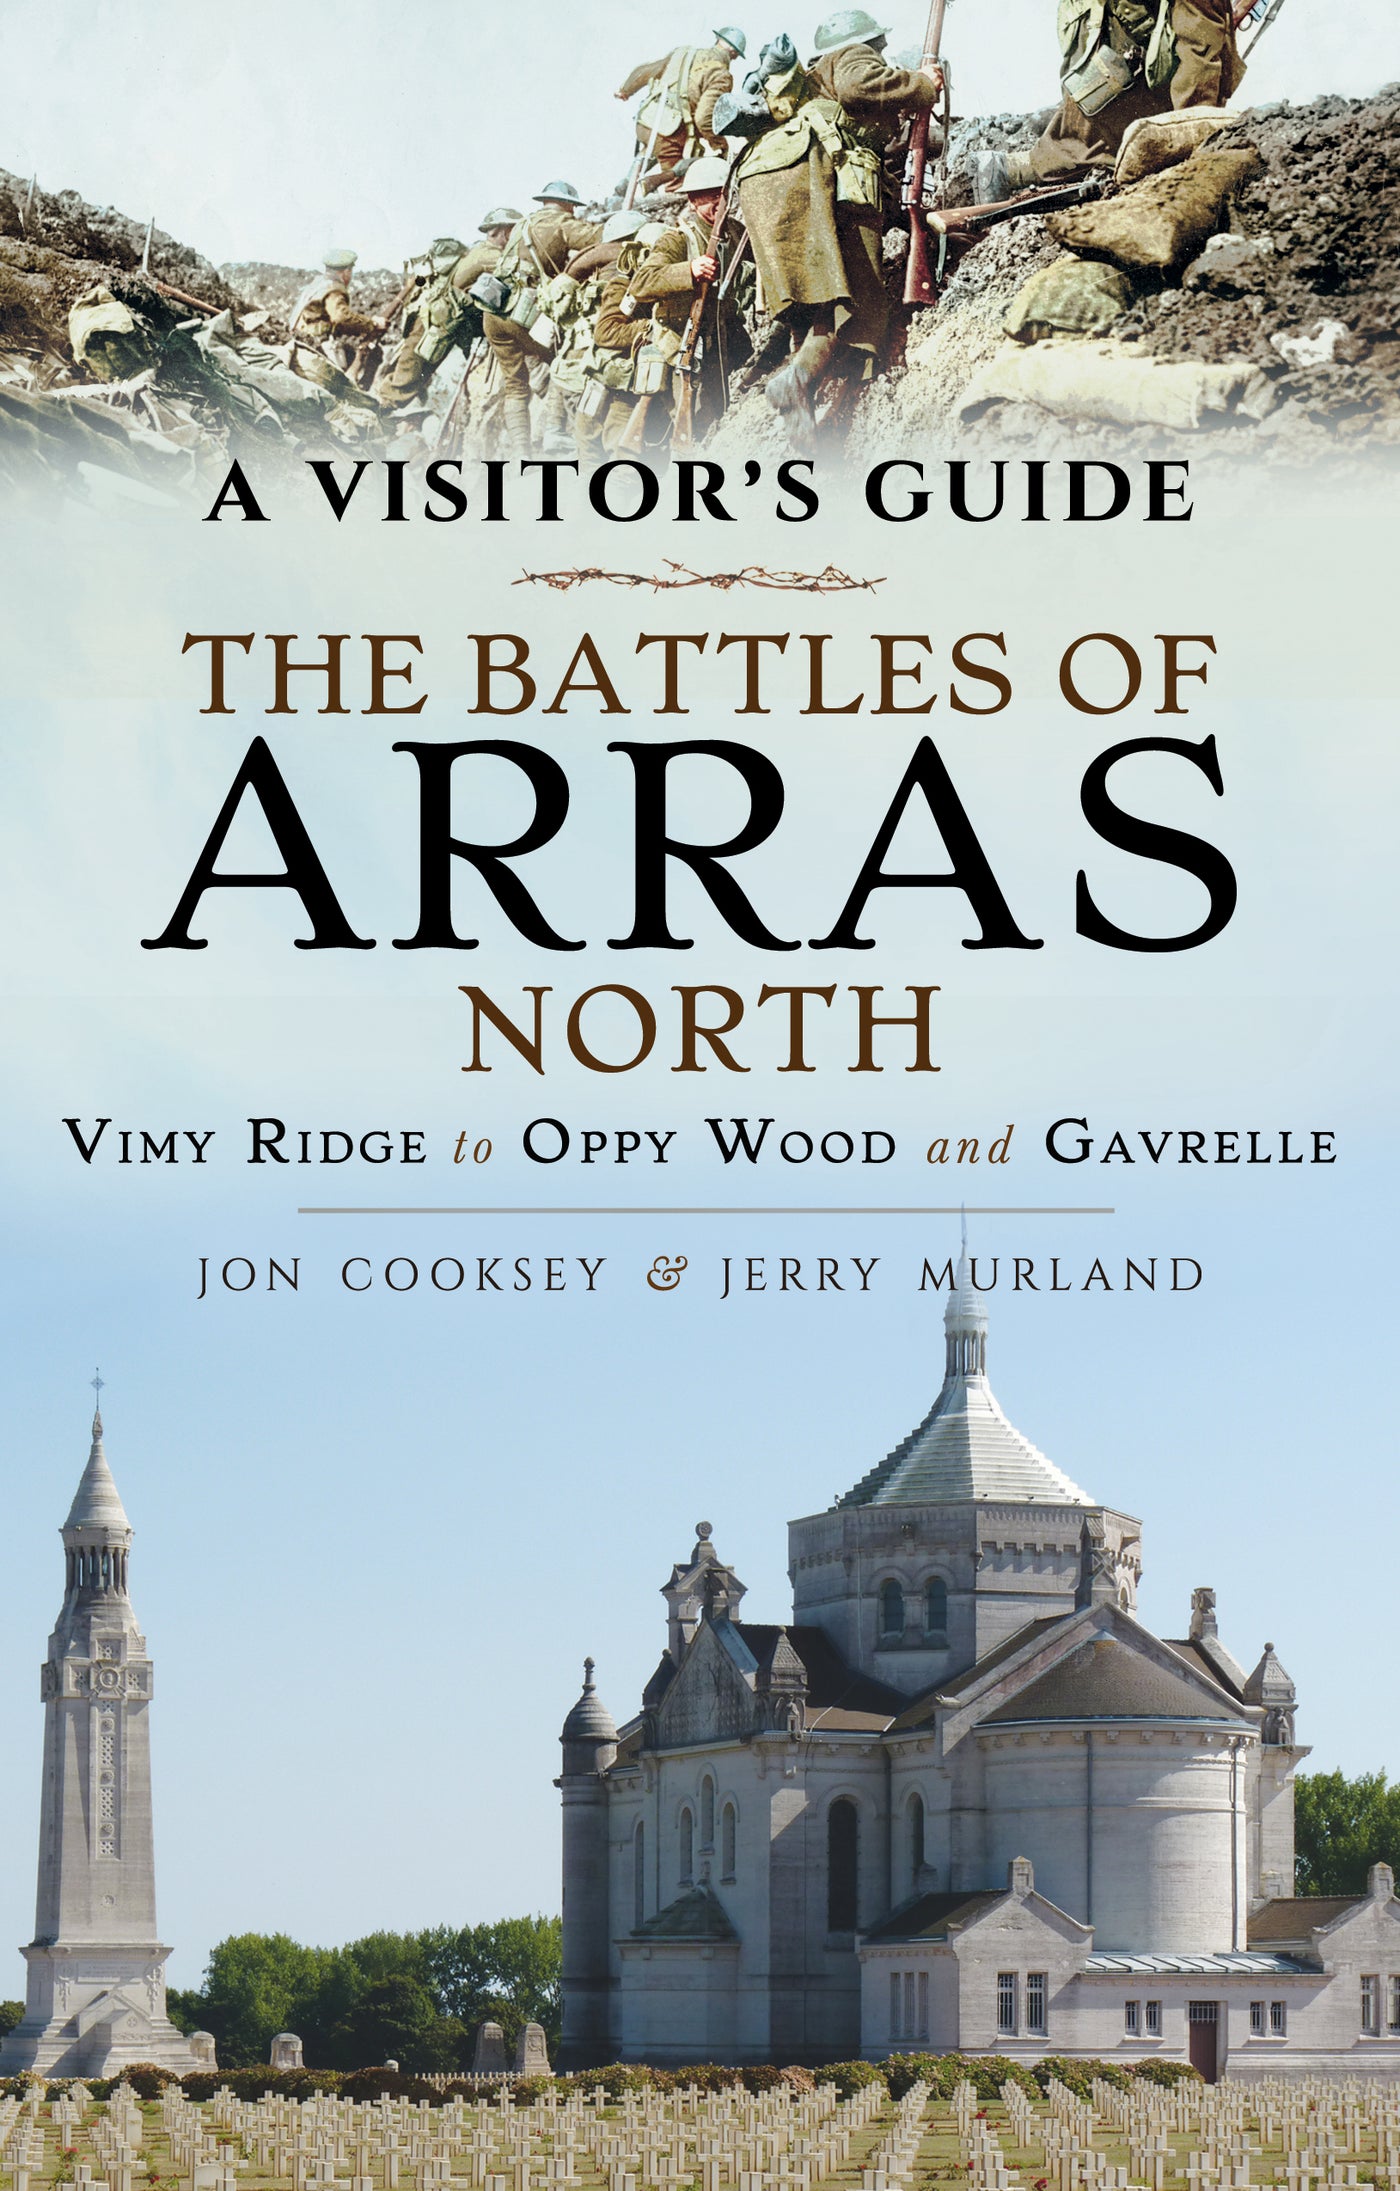 A Visitor's Guide: The Battles of Arras North